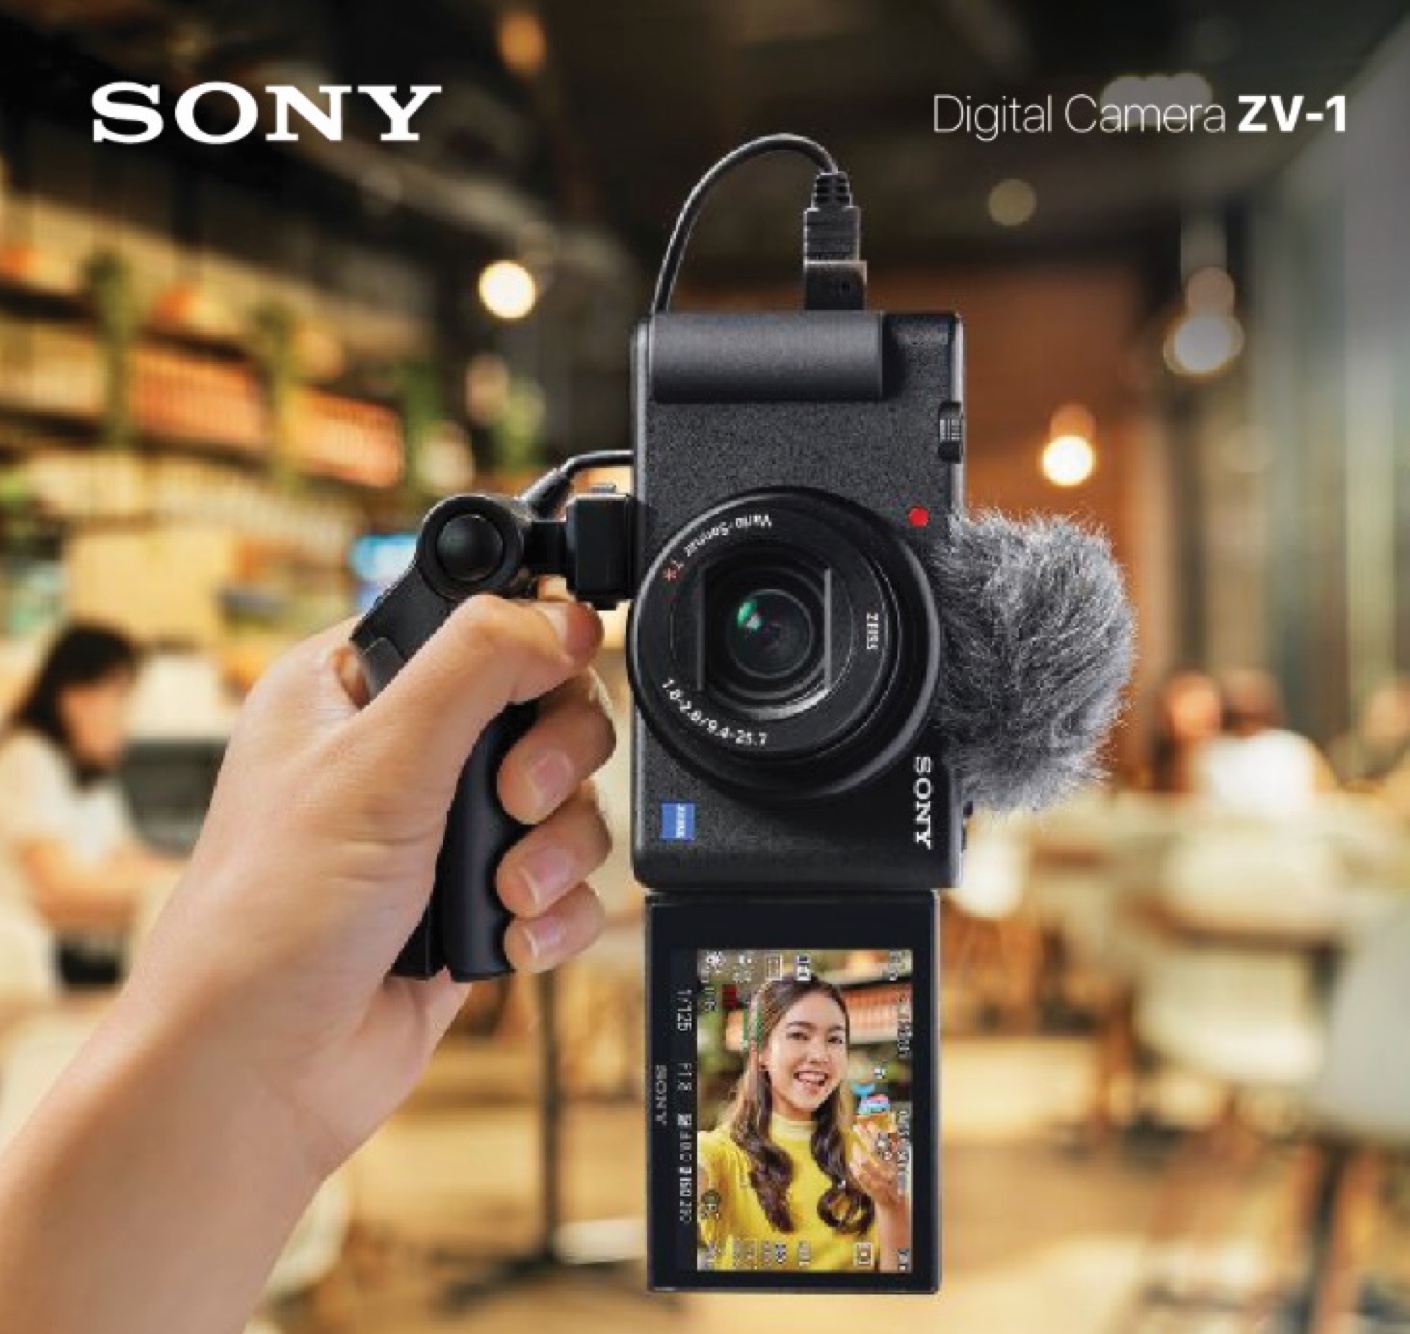 Sony offers total video solutions for everyone from beginners to professionals